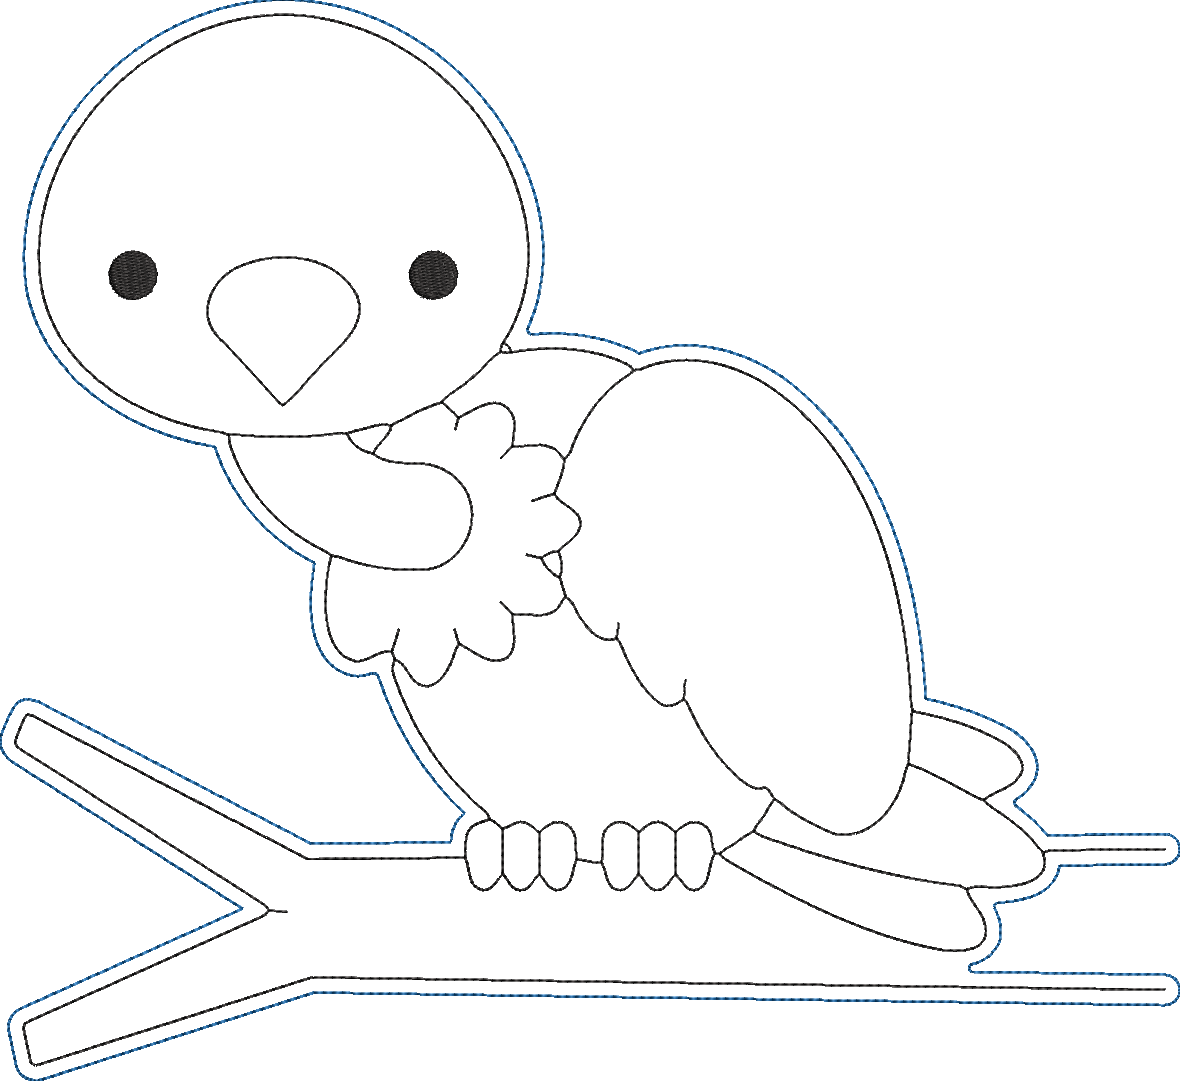 Animals AtoZ Coloring Dolls - Vulture Embroidery Design